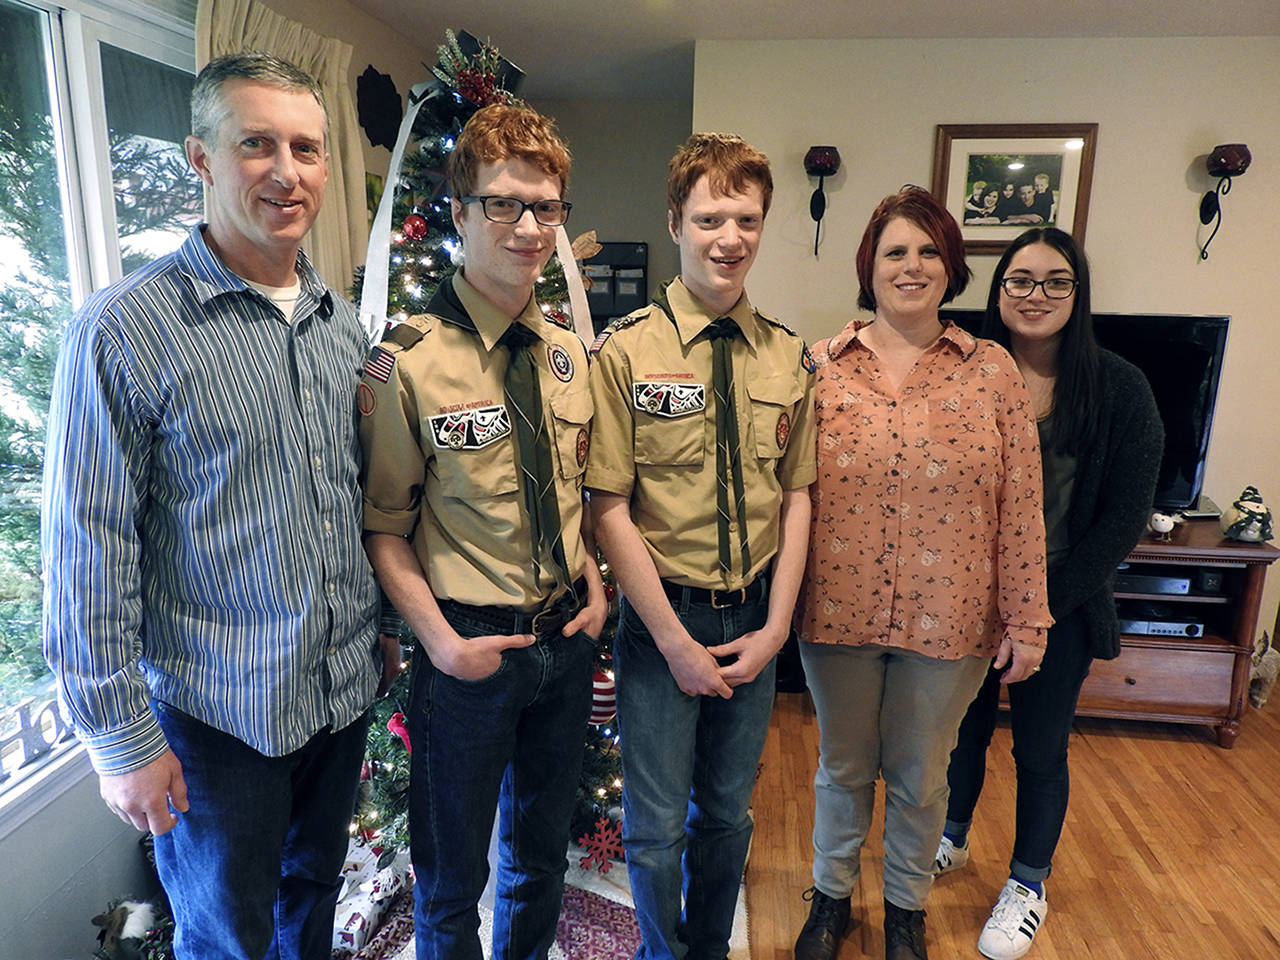 (Kat Bryant | Grays Harbor News Group) The Erwin family, from left: Mike, Jared, Trace, Carrie and Hannah (the twins’ sister).